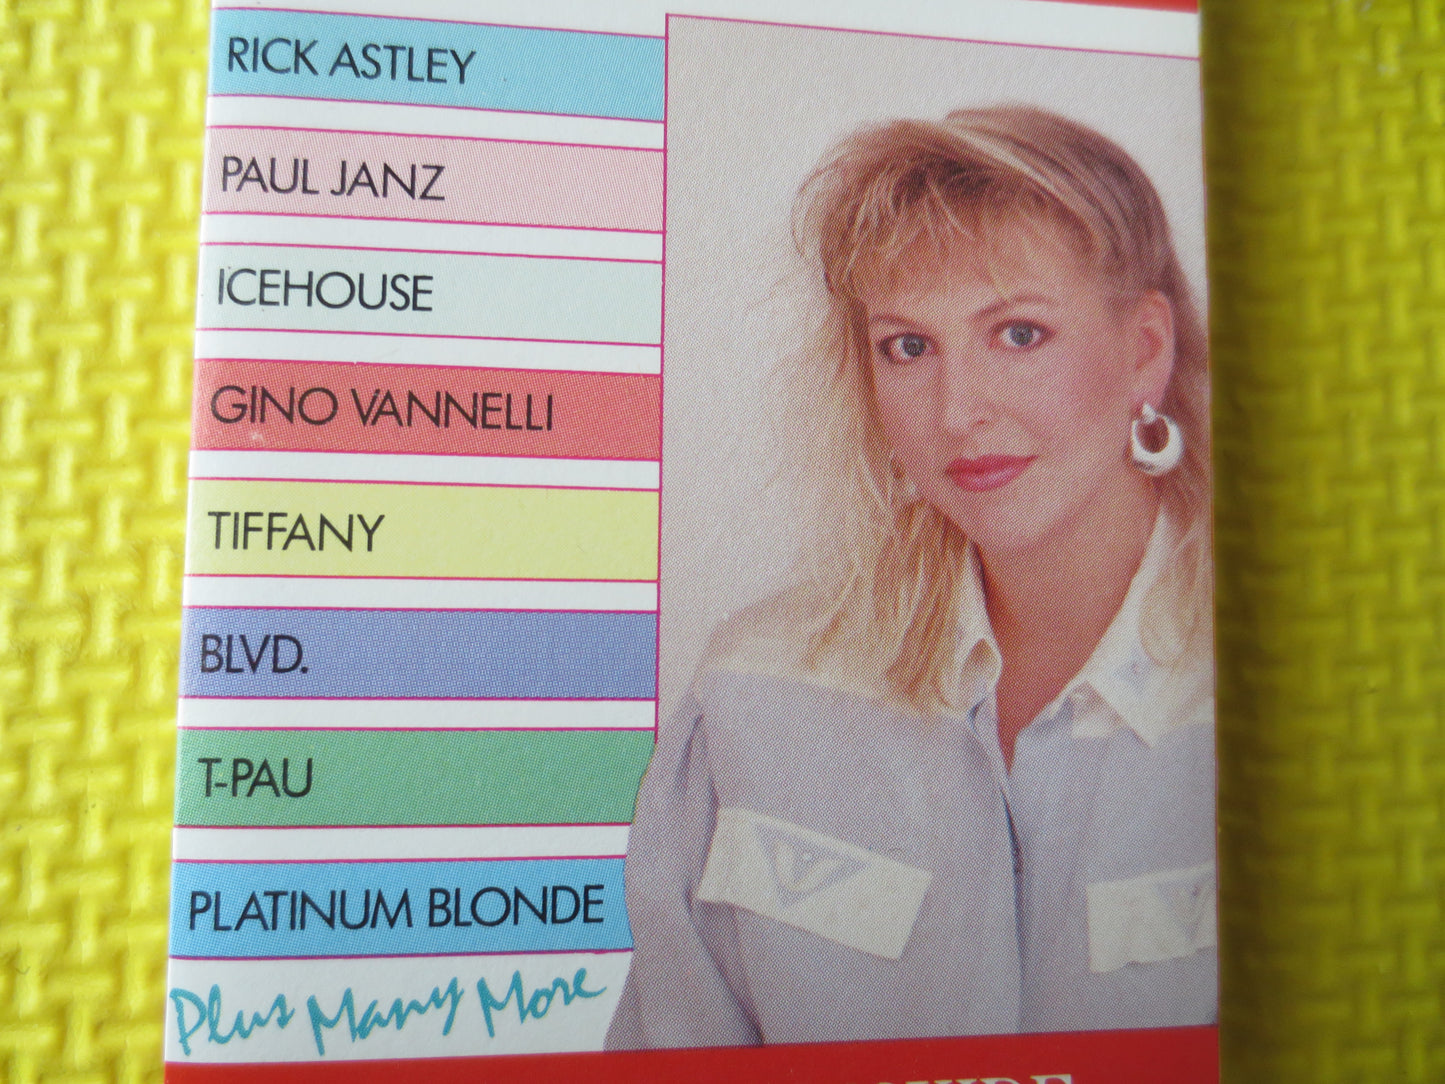 The VIDEO HITS, Album 2, RICK Astley Tapes, Tiffany Tapes, Cassette Music, Tape Cassette, Music Cassette, 1988 Cassette